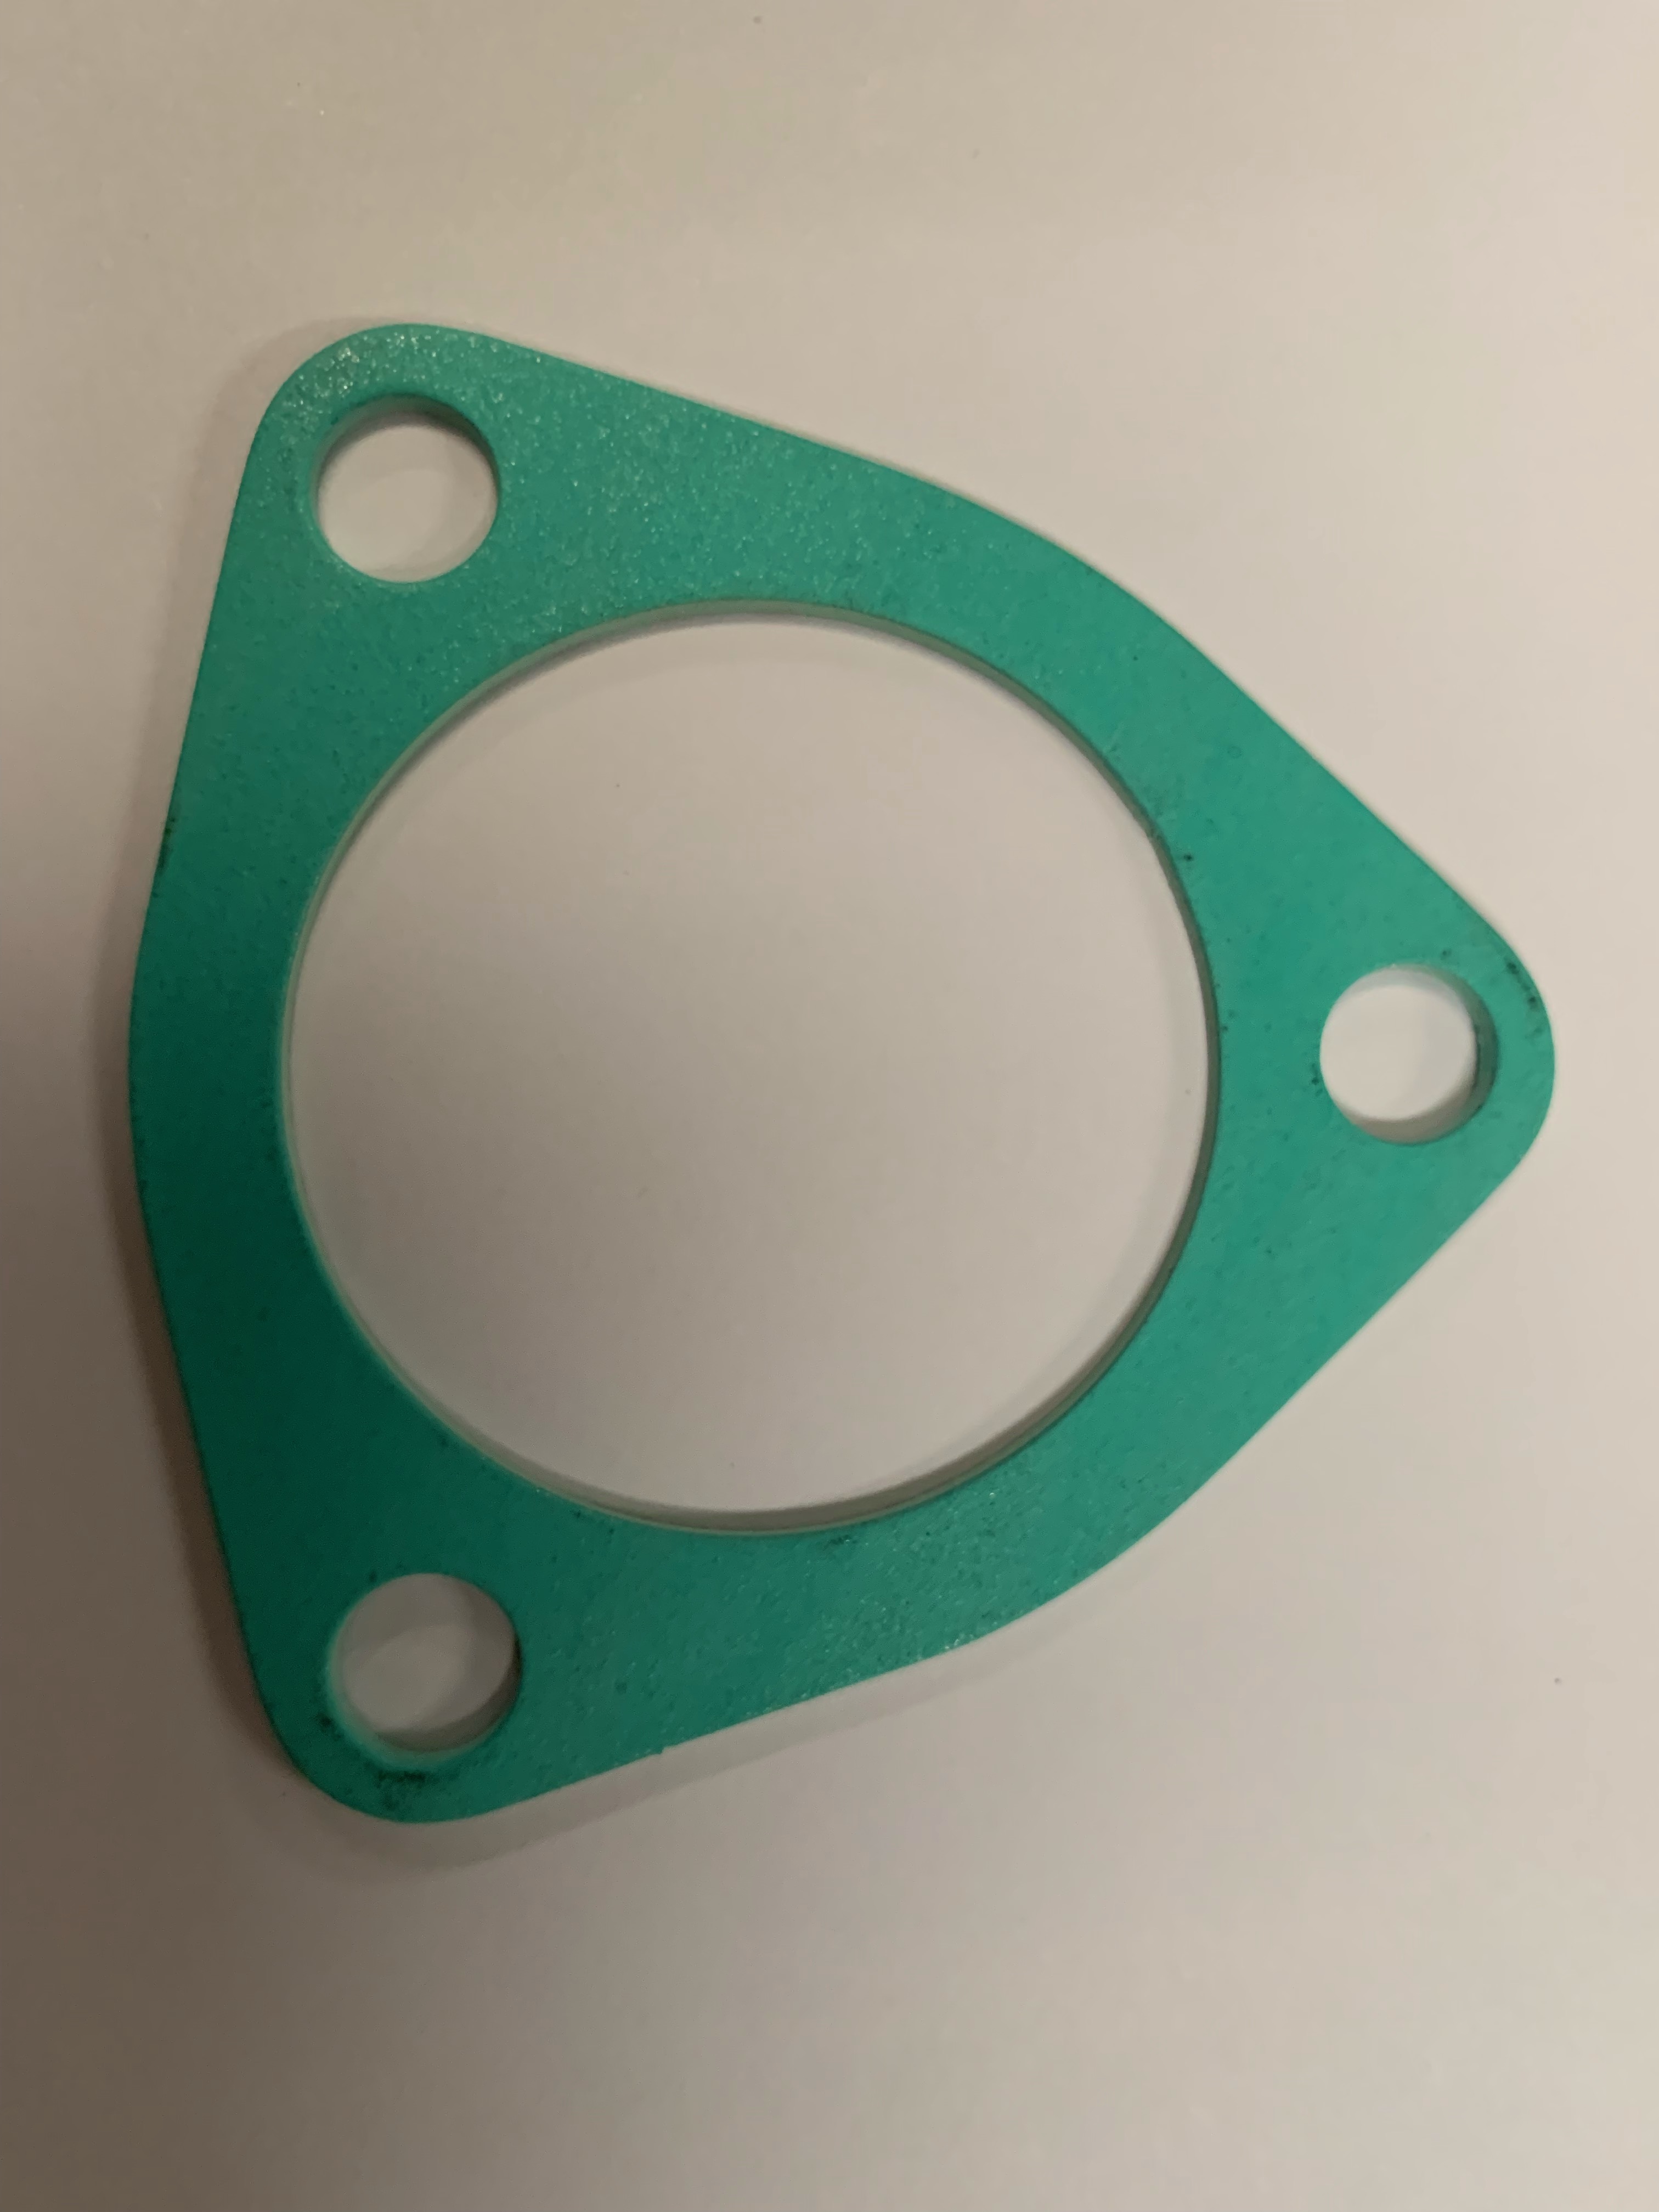 28098,  18978 Relief Valve  GASKET  # 9  (parts list here) As Seen In...